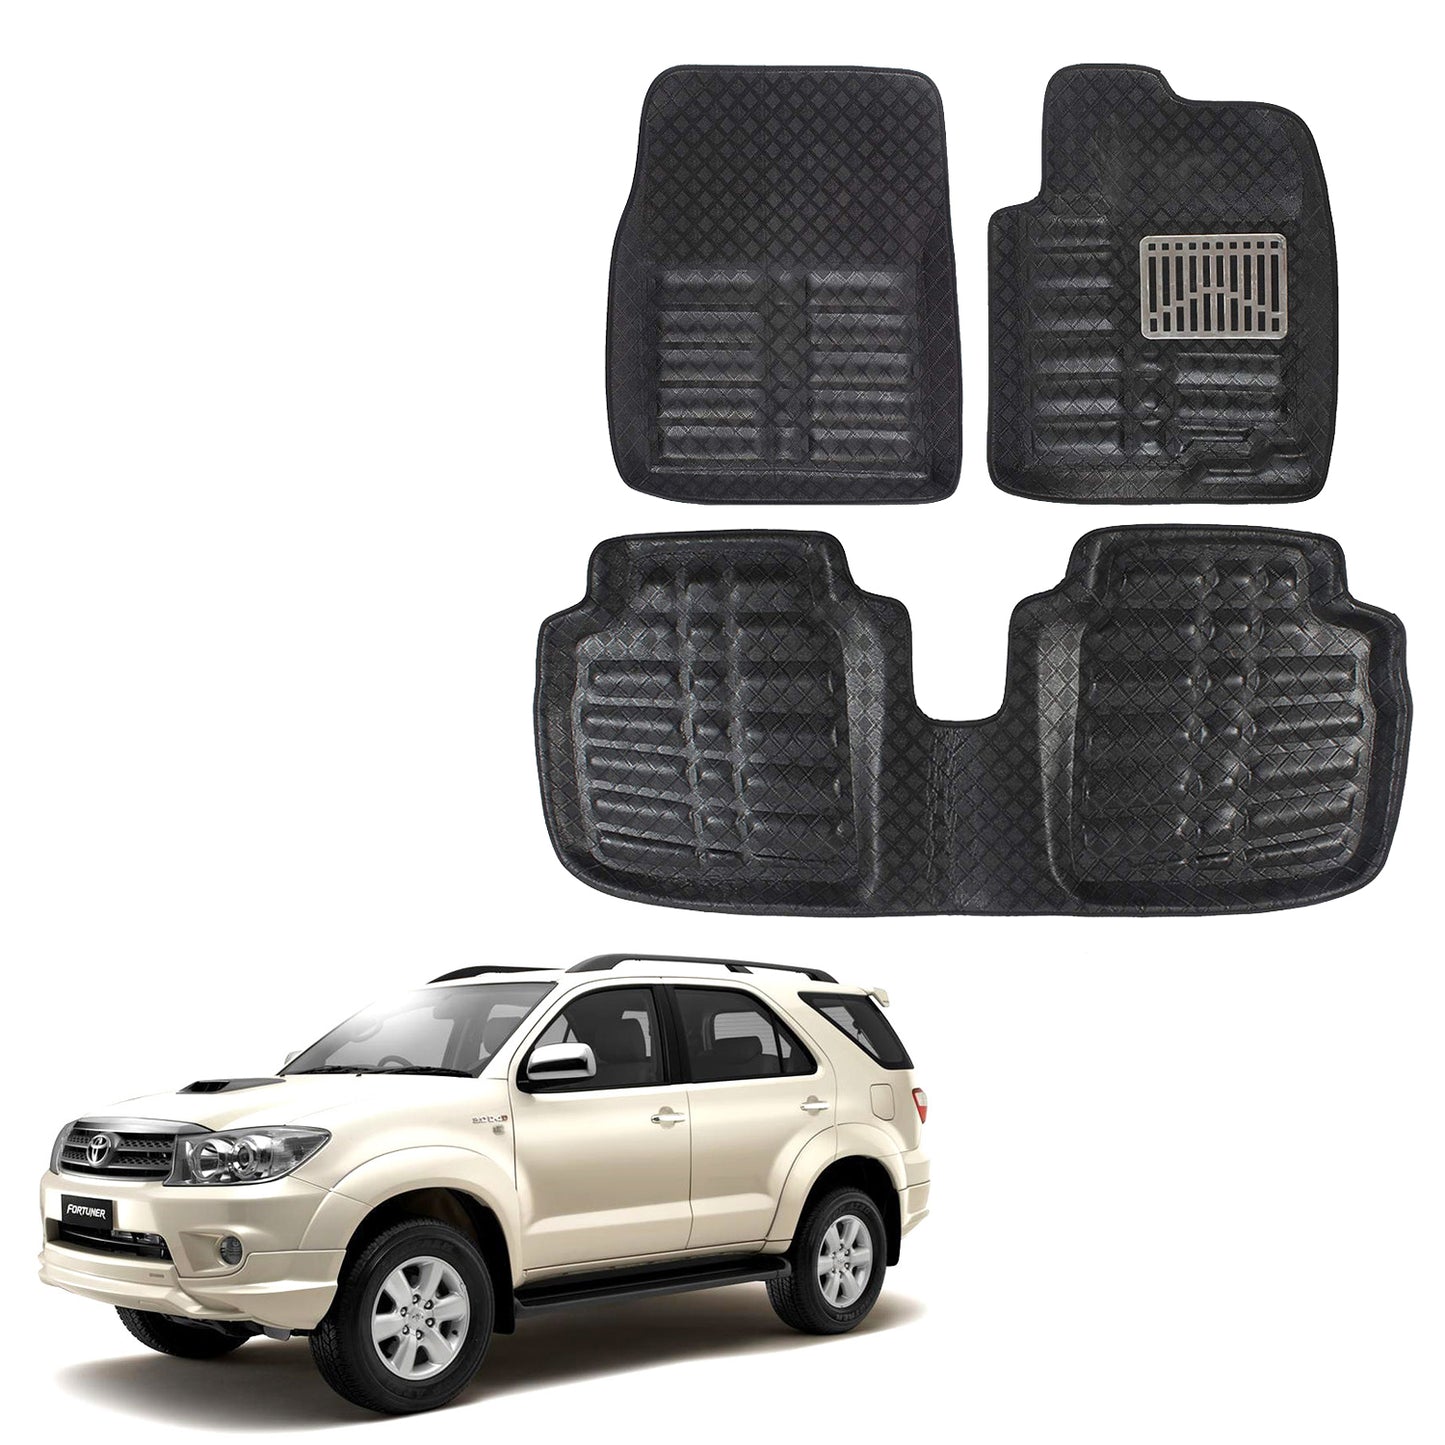 Oshotto 4D Artificial Leather Car Floor Mats For Toyota Fortuner Old - Set of 5 (Complete Mat with 3rd Row and Dicky) - Black